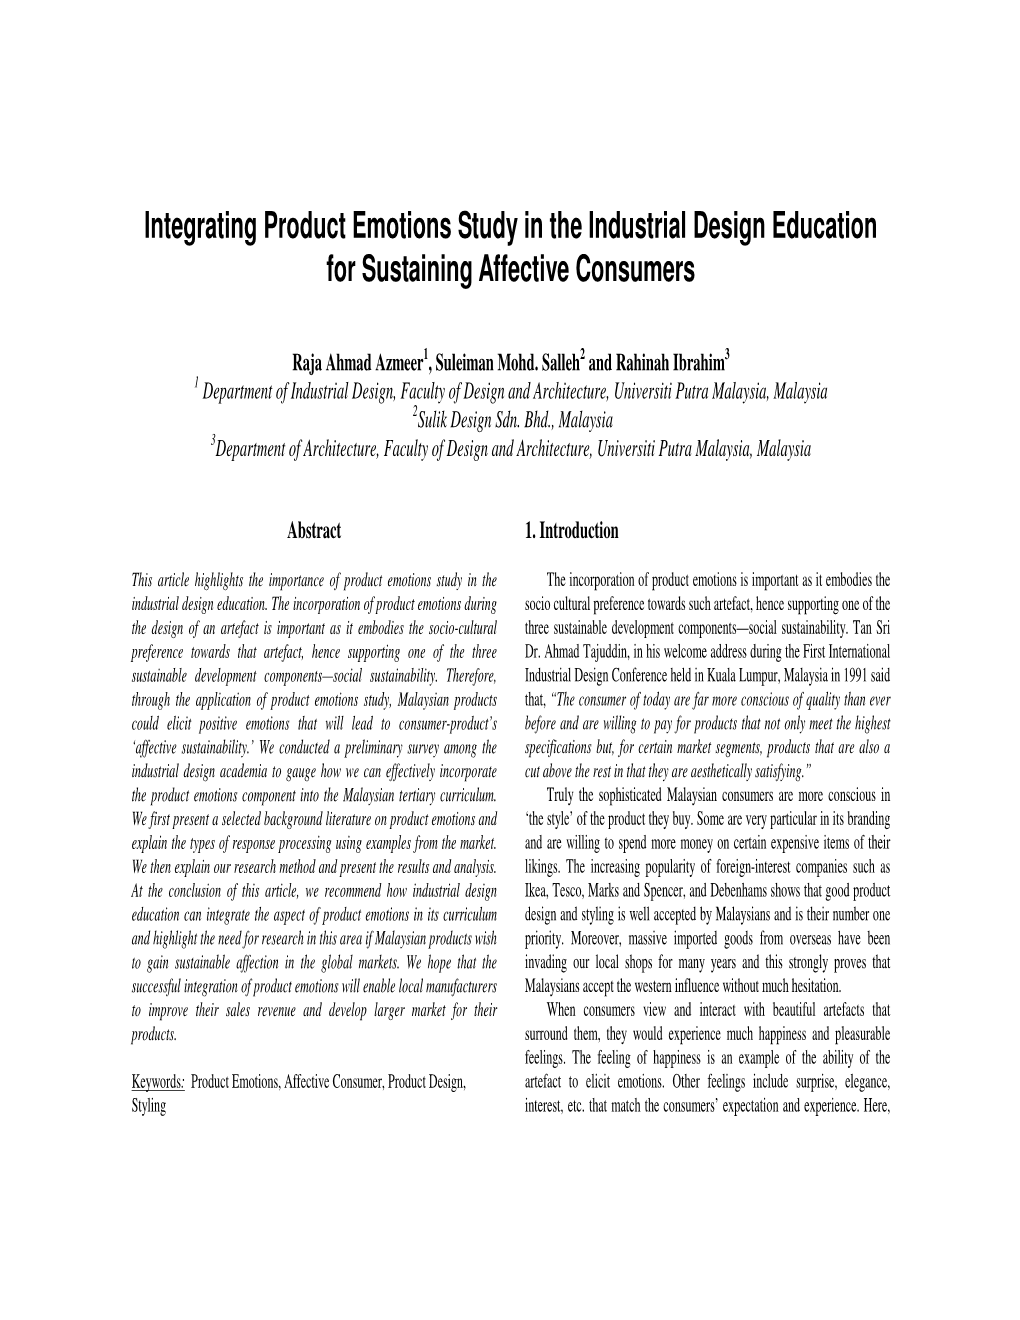 Integrating Product Emotions Study in the Industrial Design Education for Sustaining Affective Consumers